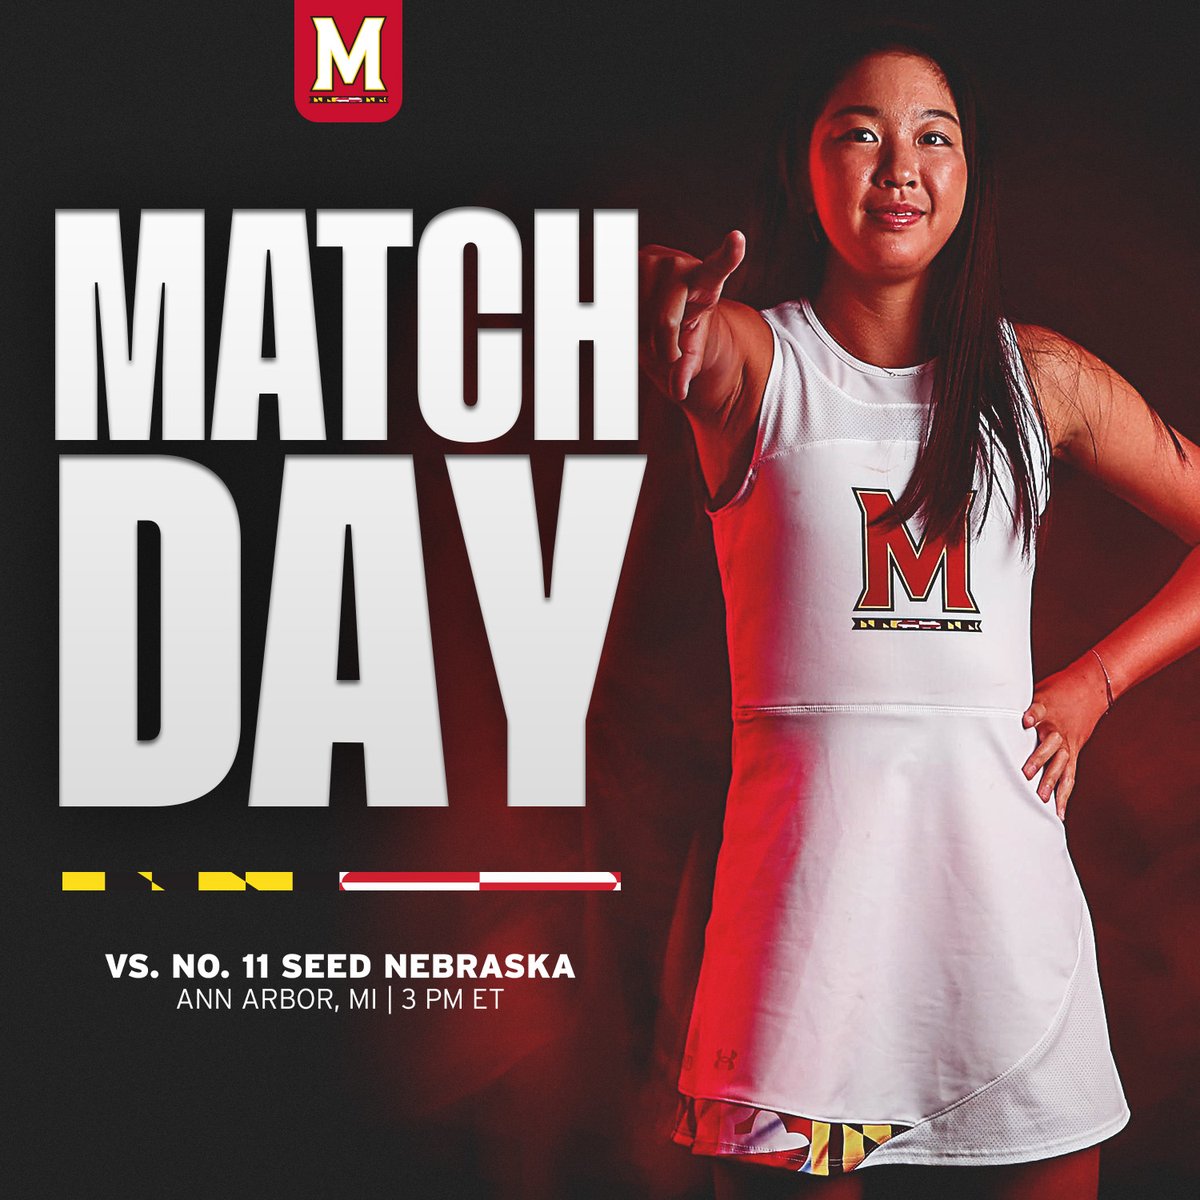 It's a B1G Matchday for the Terps🐢🎾 Live Stream: go.umd.edu/3WdnMME Live Stats: go.umd.edu/4aOuddr #TerpTennis